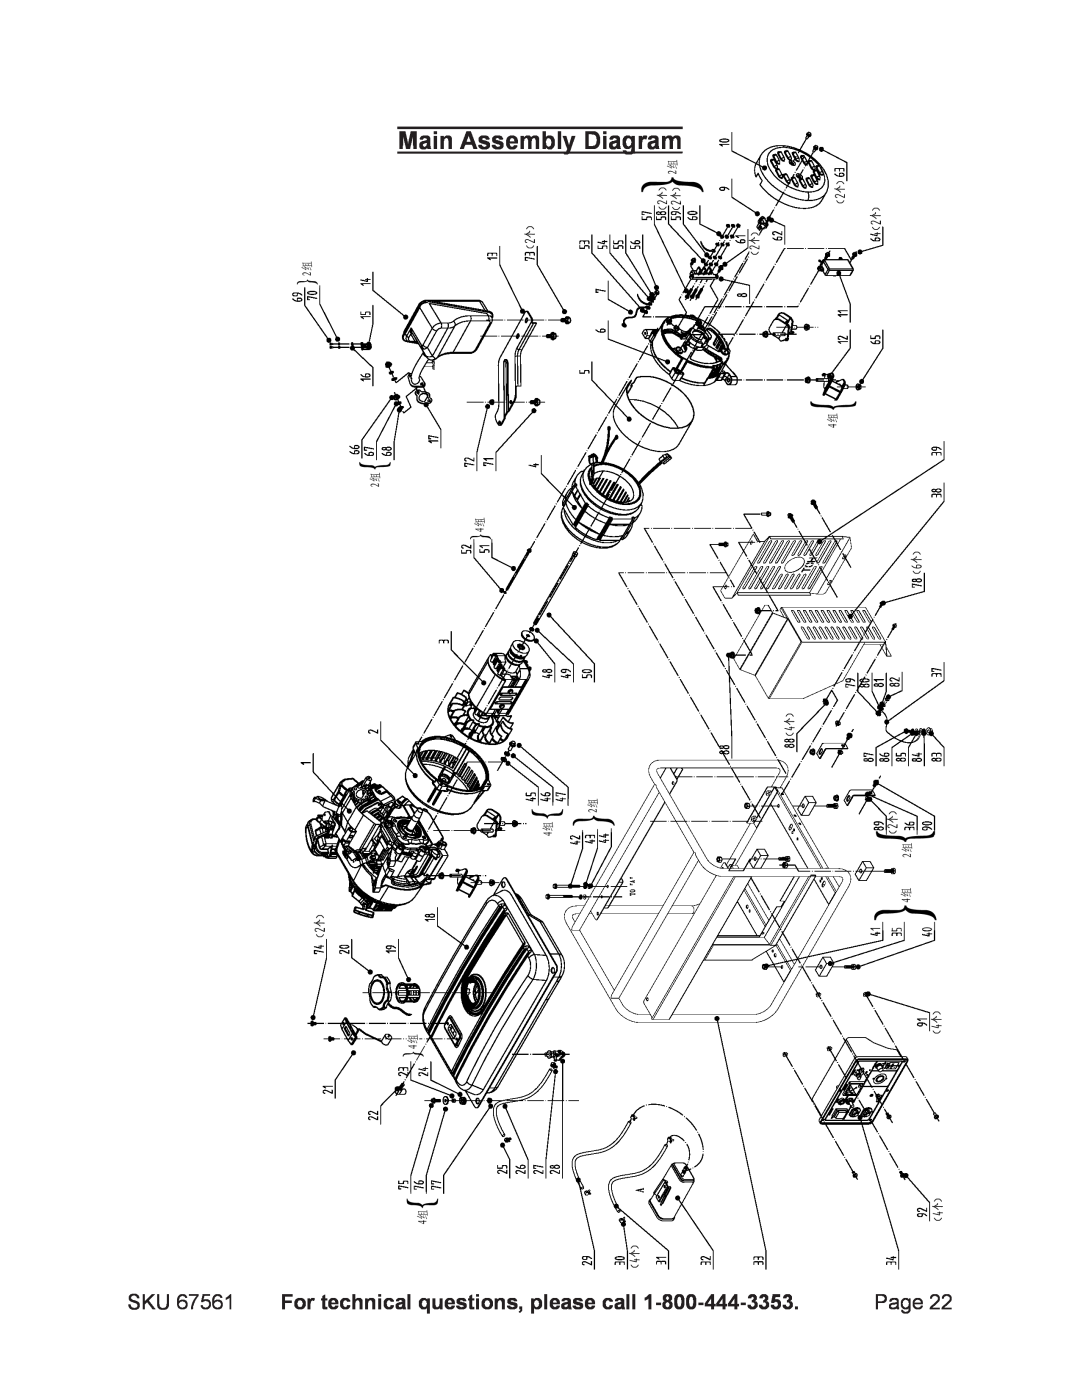 Chicago Electric 67561 manual Main Assembly Diagram, For technical questions, please call,    ,  $ , 72 $ 